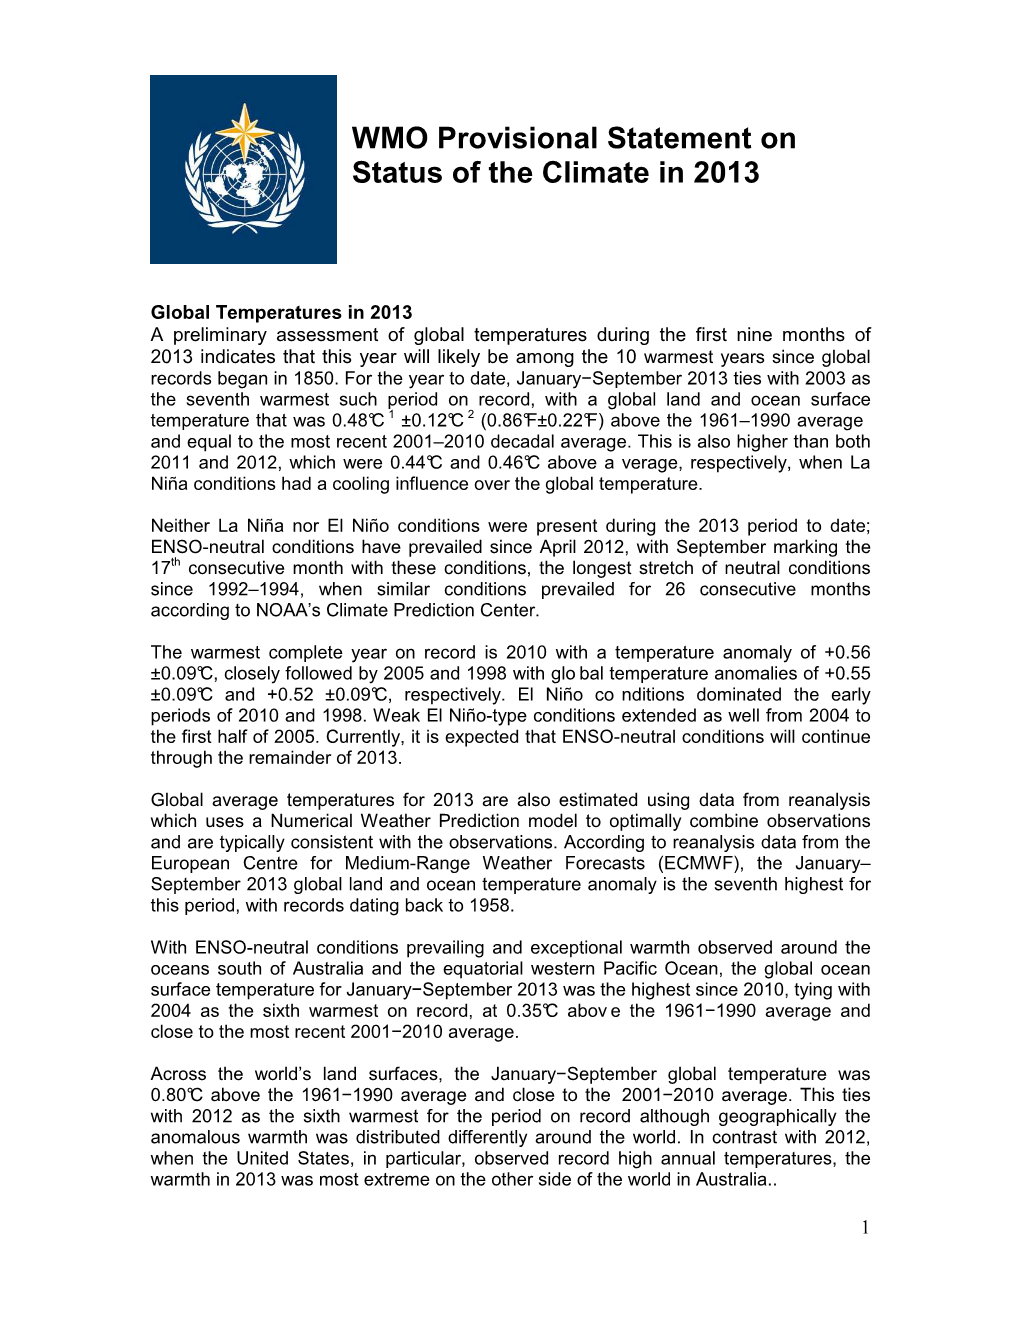 WMO Provisional Statement on Status of the Climate 2013